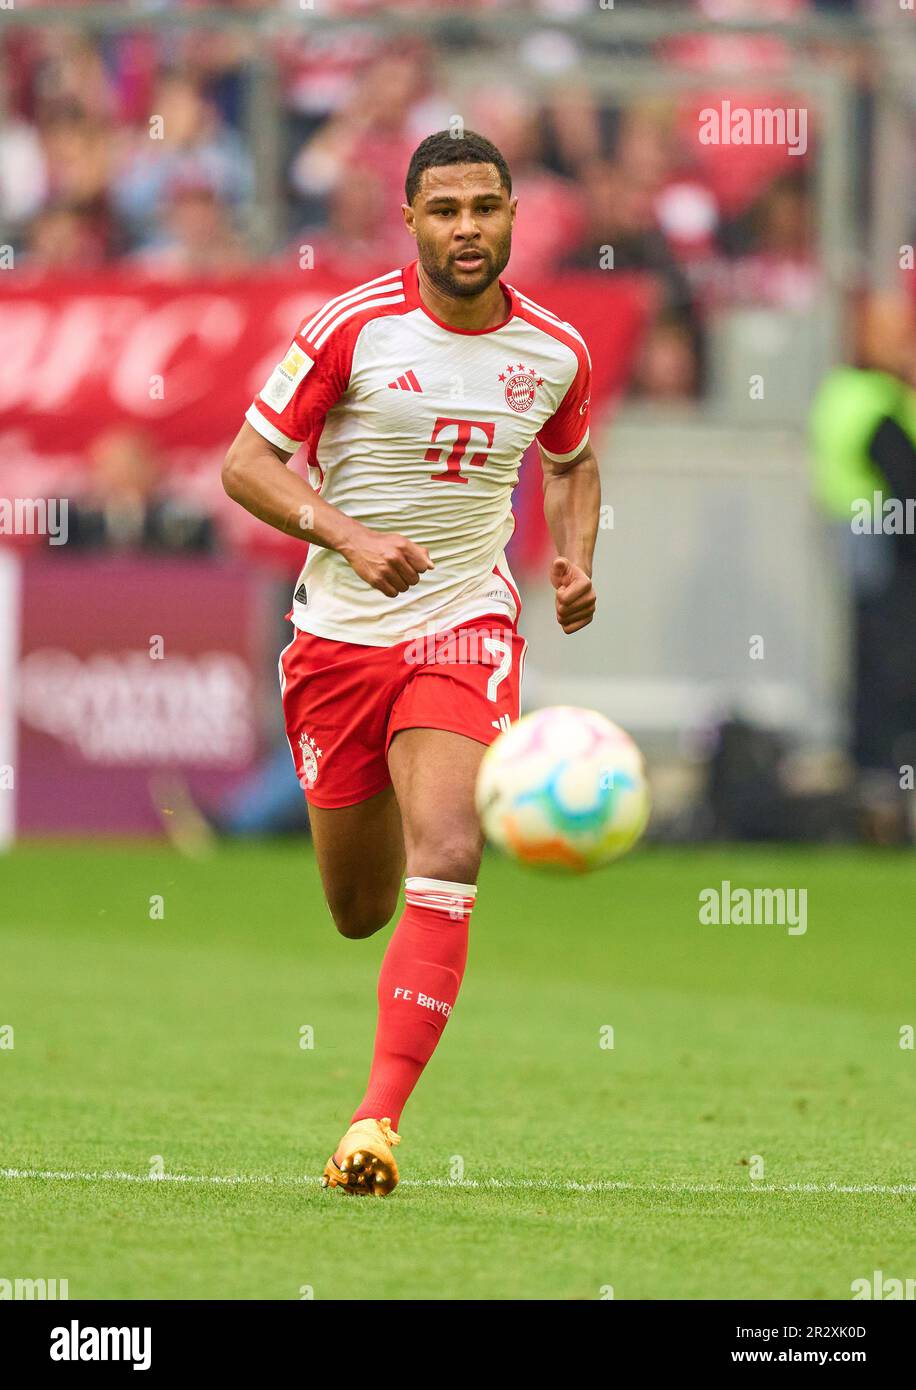 Serge GNABRY, FCB 7  in the match FC BAYERN MUENCHEN - RB LEIPZIG 1-3 1.German Football League on May 20, 2023 in Munich, Germany. Season 2022/2023, matchday 33, 1.Bundesliga, FCB, München, 33.Spieltag. © Peter Schatz / Alamy Live News    - DFL REGULATIONS PROHIBIT ANY USE OF PHOTOGRAPHS as IMAGE SEQUENCES and/or QUASI-VIDEO - Stock Photo